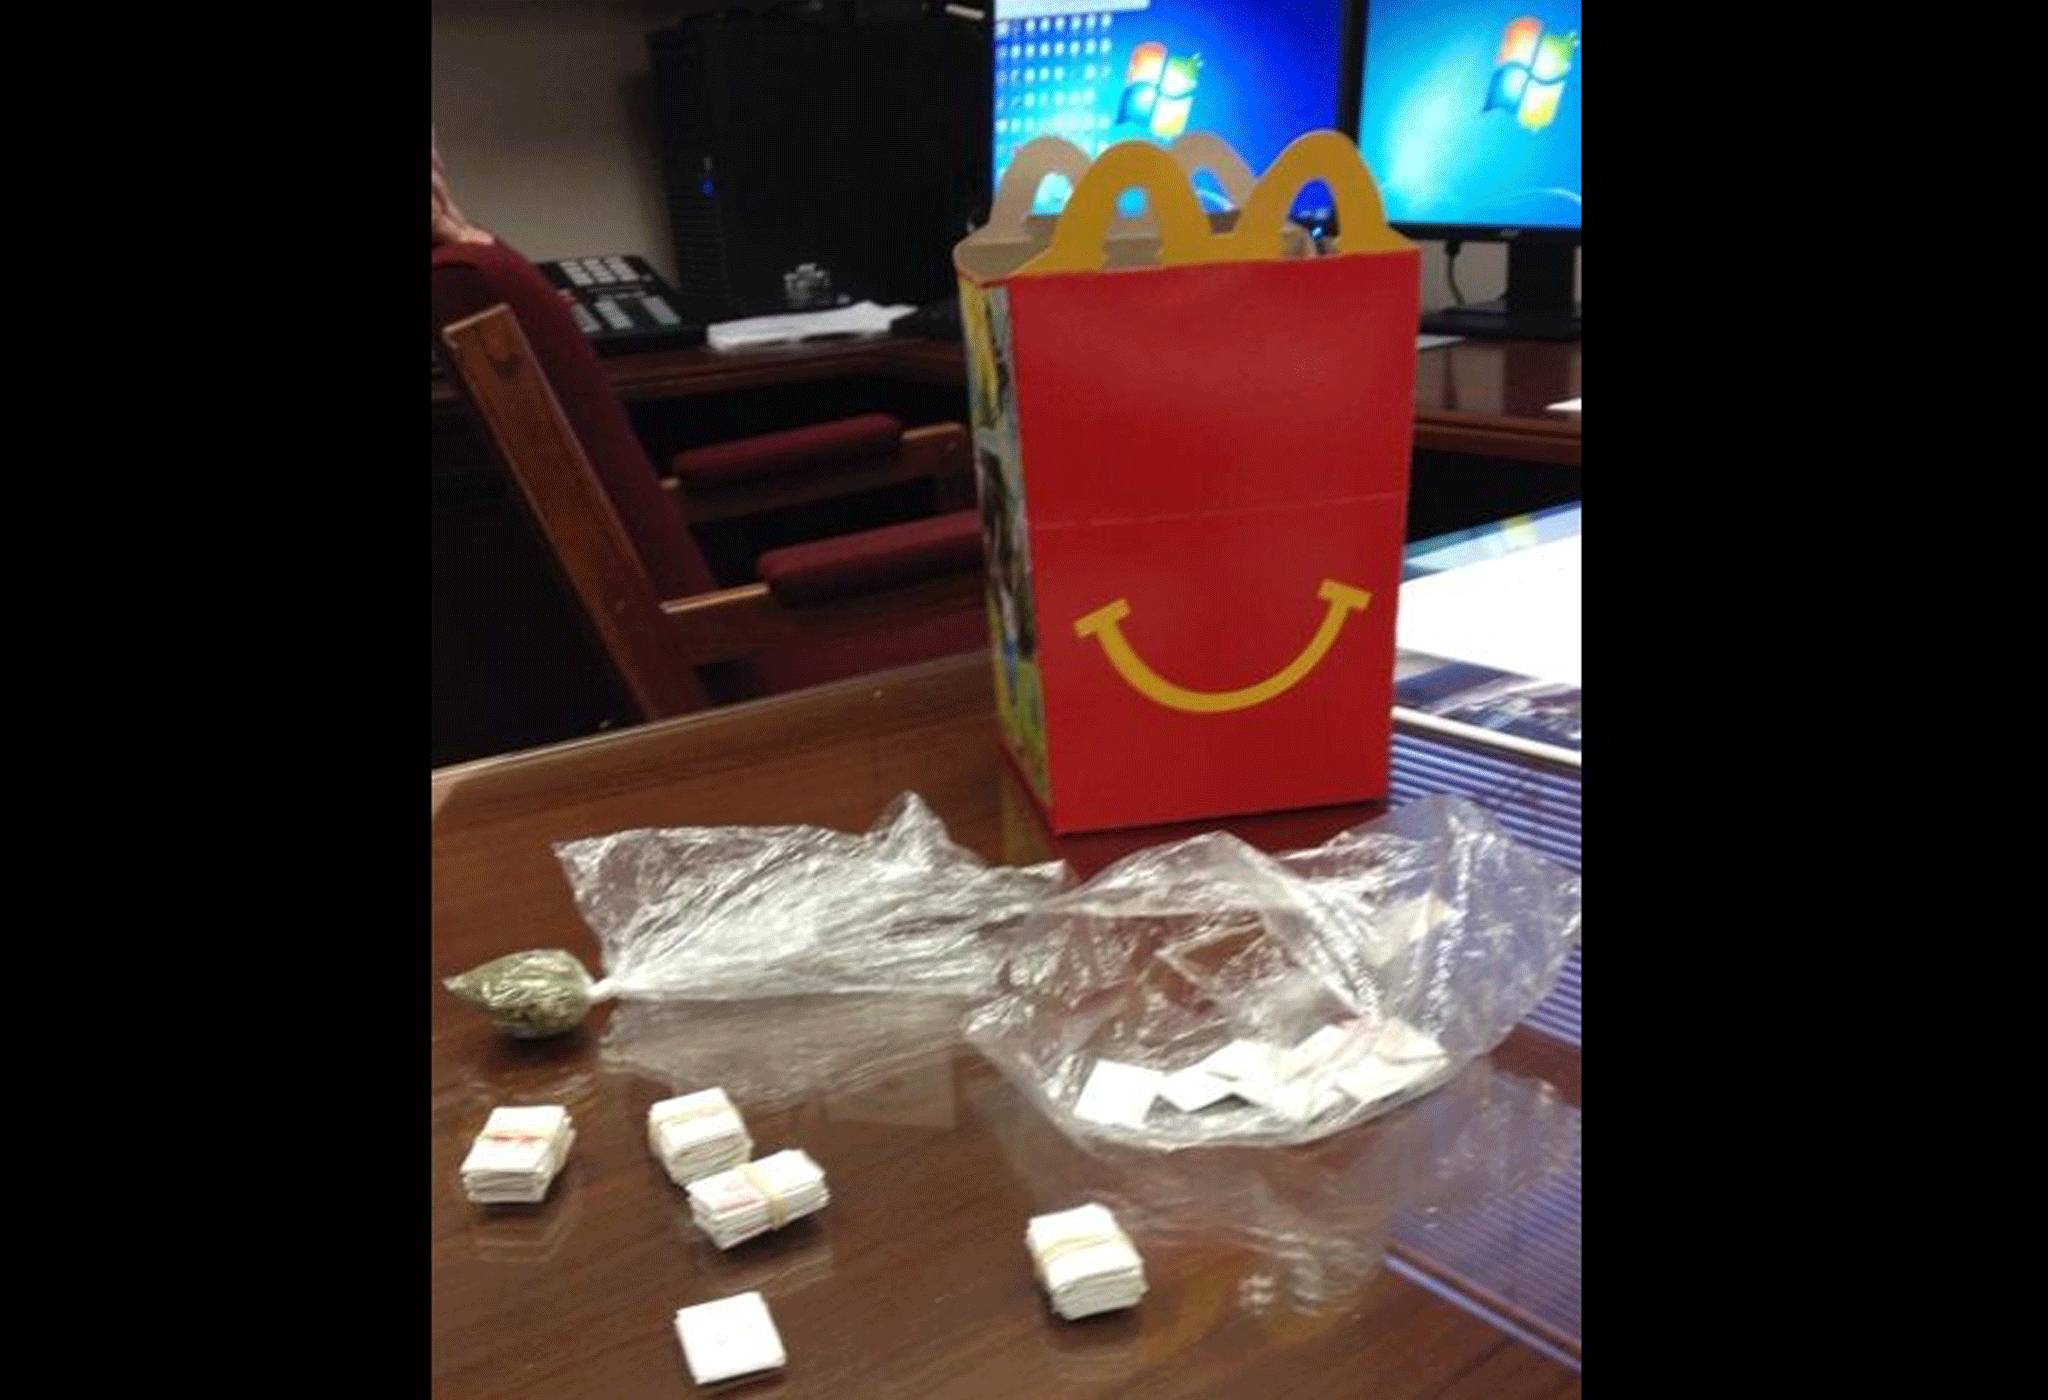 Heroin Happy Meals were allegedly sold at East Liberty McDonalds in Pittsburgh